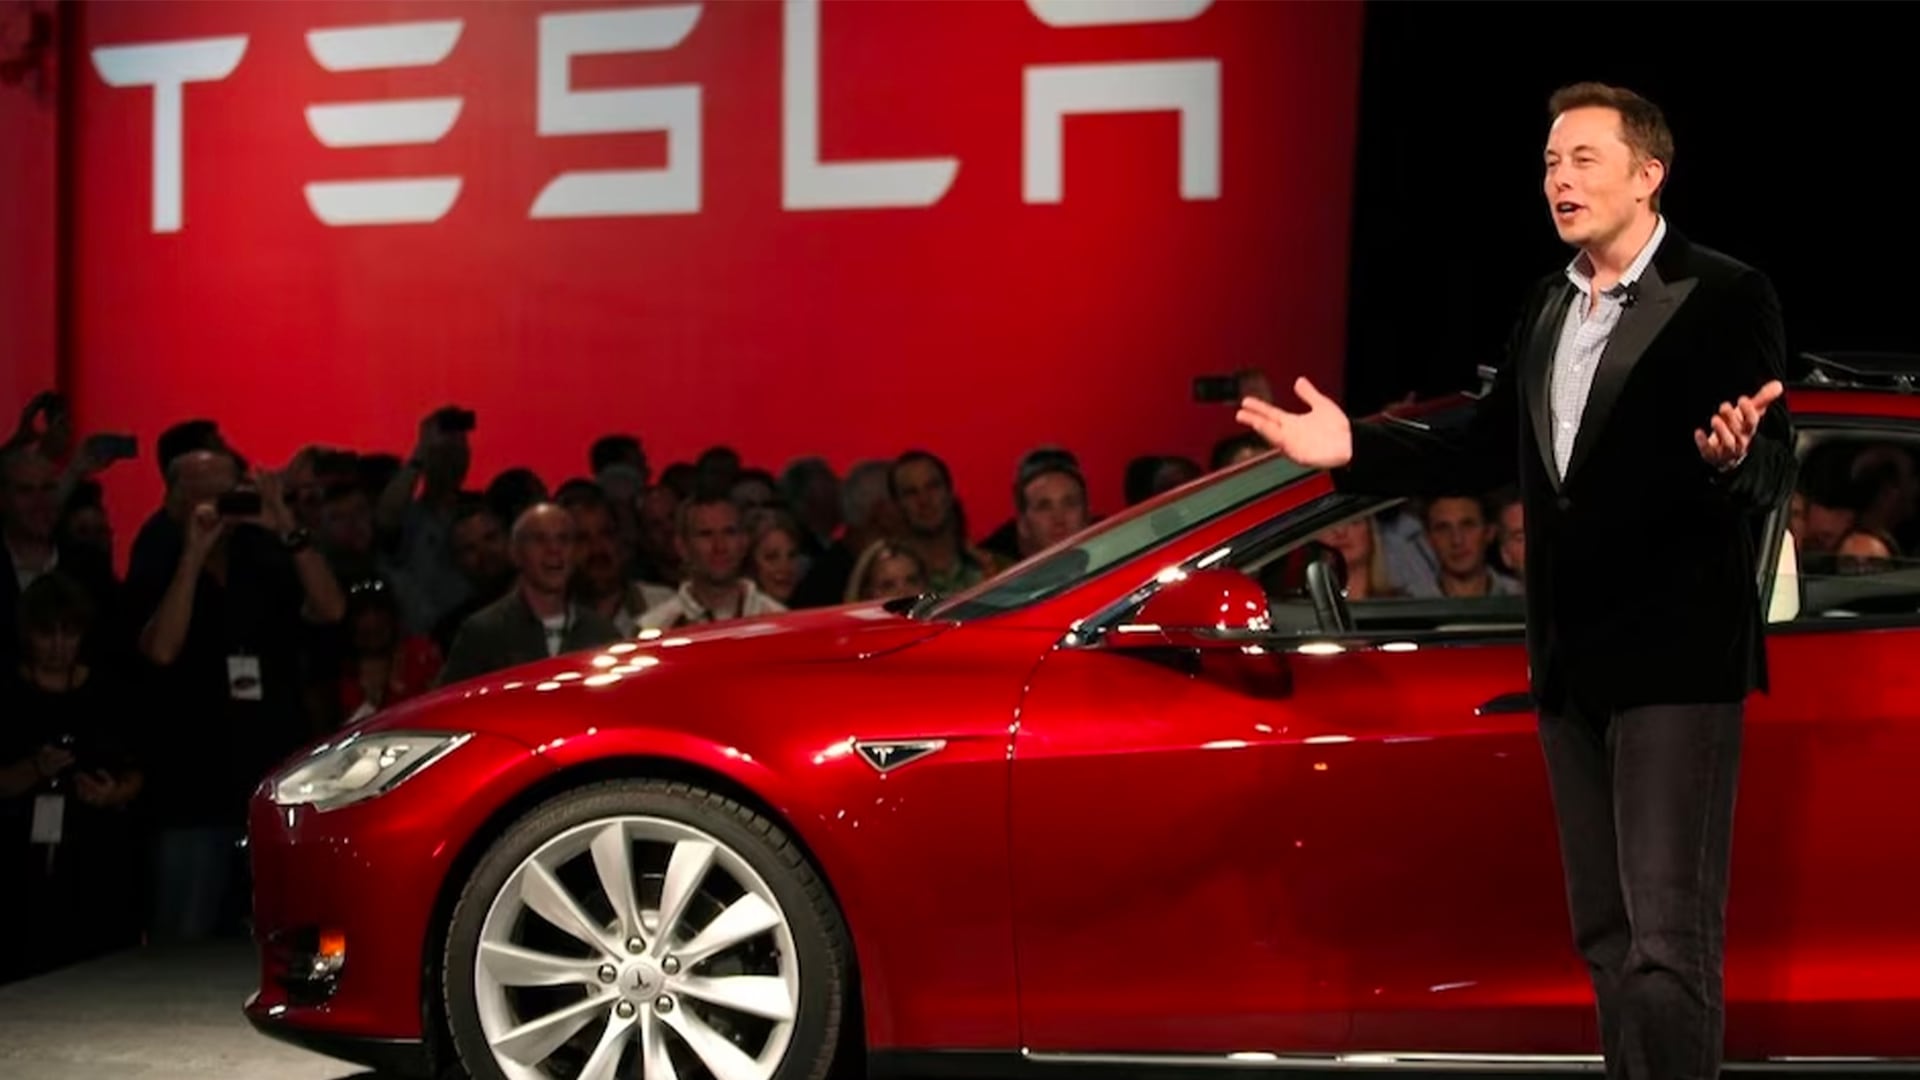 Tesla in India: Elon Musk's EV company set to sign deal to start importing  cars, set up $2bn factory